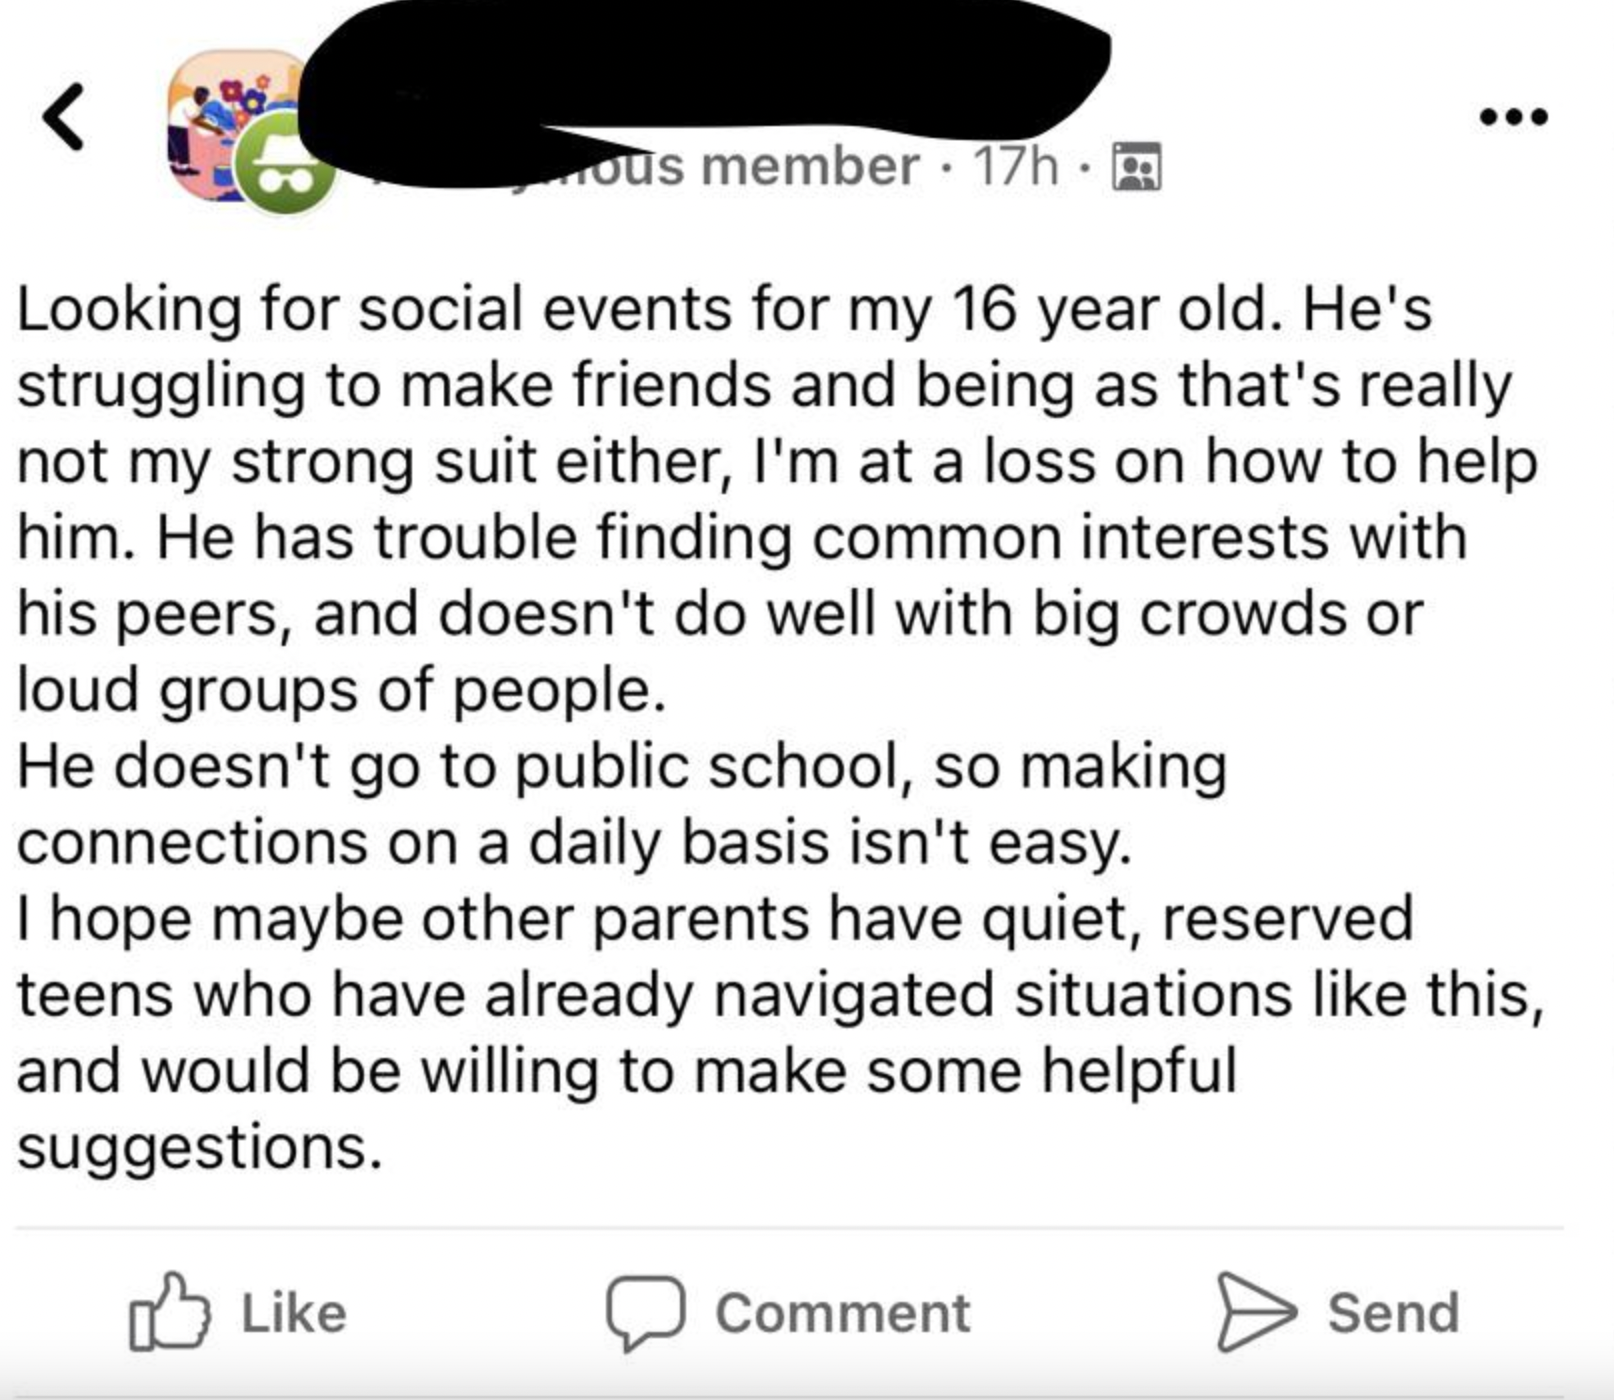 screenshot - ous member 17h. Looking for social events for my 16 year old. He's struggling to make friends and being as that's really not my strong suit either, I'm at a loss on how to help him. He has trouble finding common interests with his peers, and 